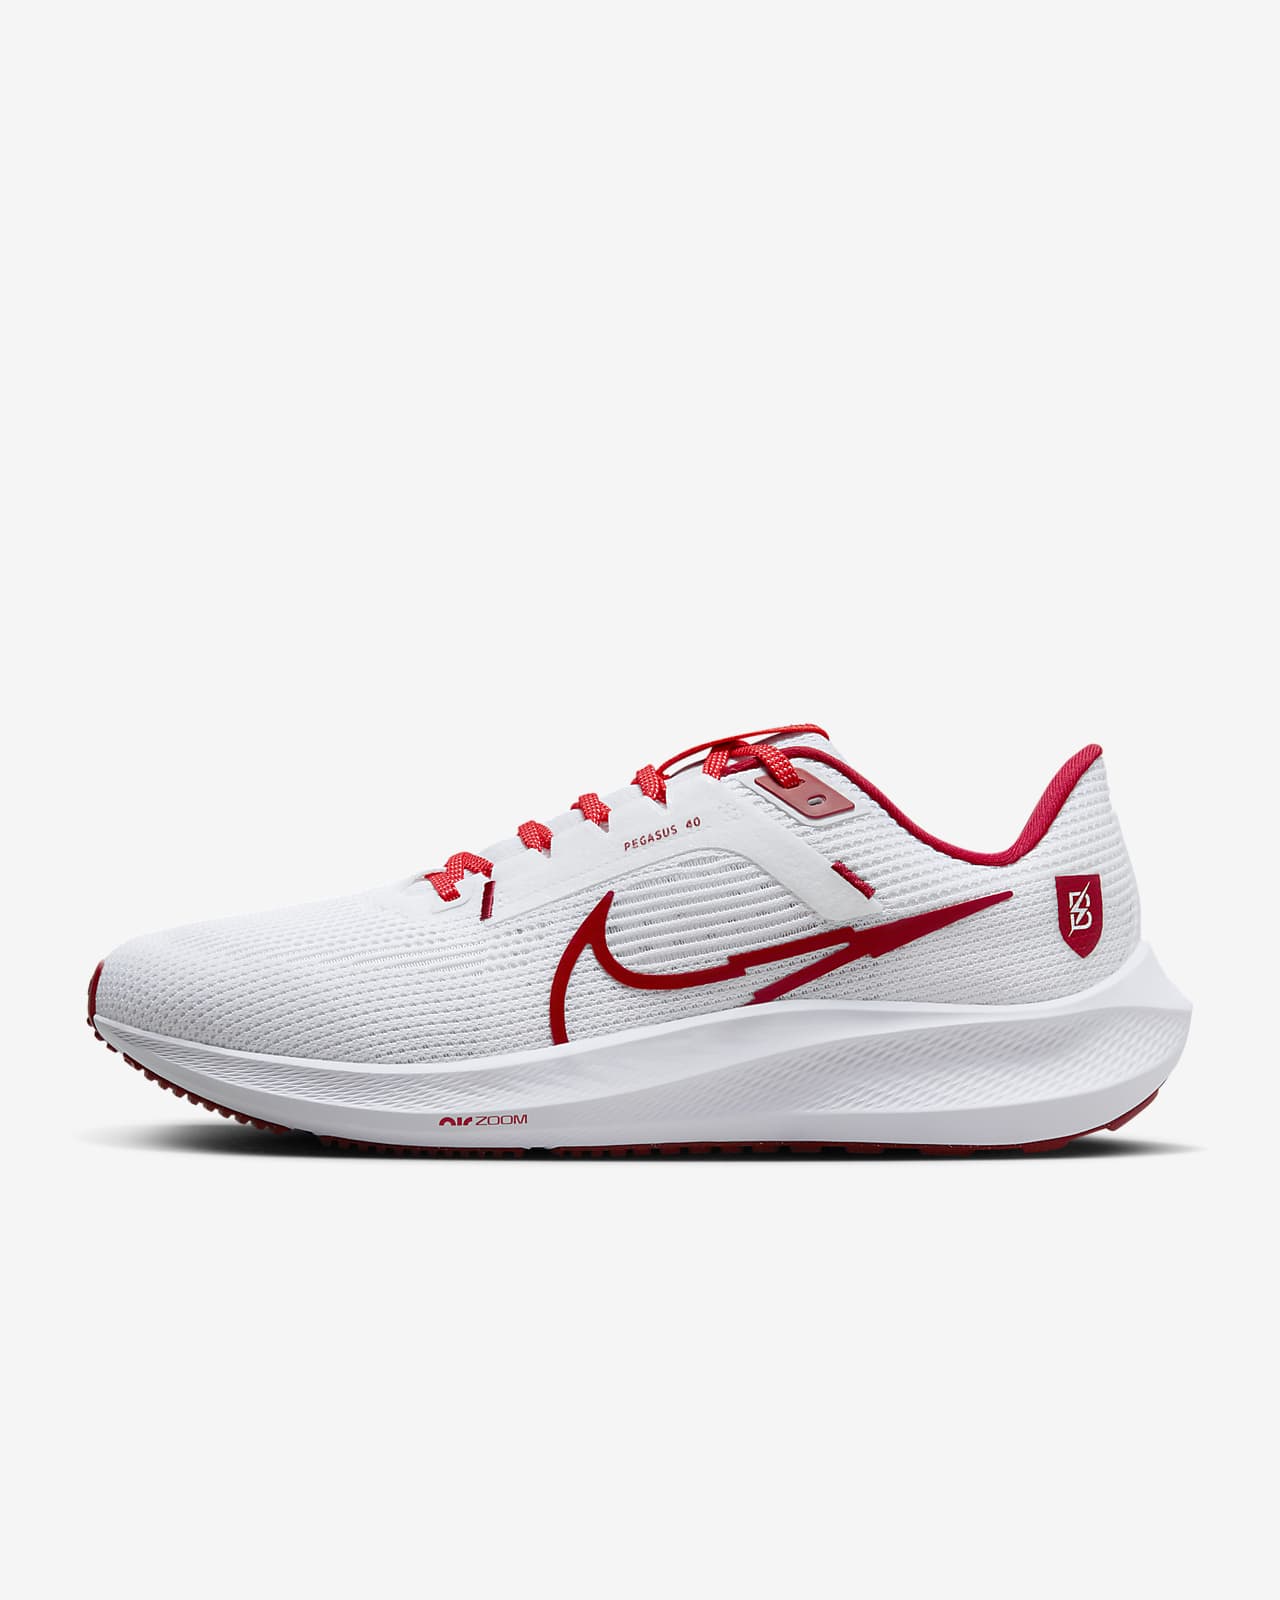 Air Nike Shoes Women’s – Buy Nike Air Max SC Women’s Shoes at the Cheapest Price